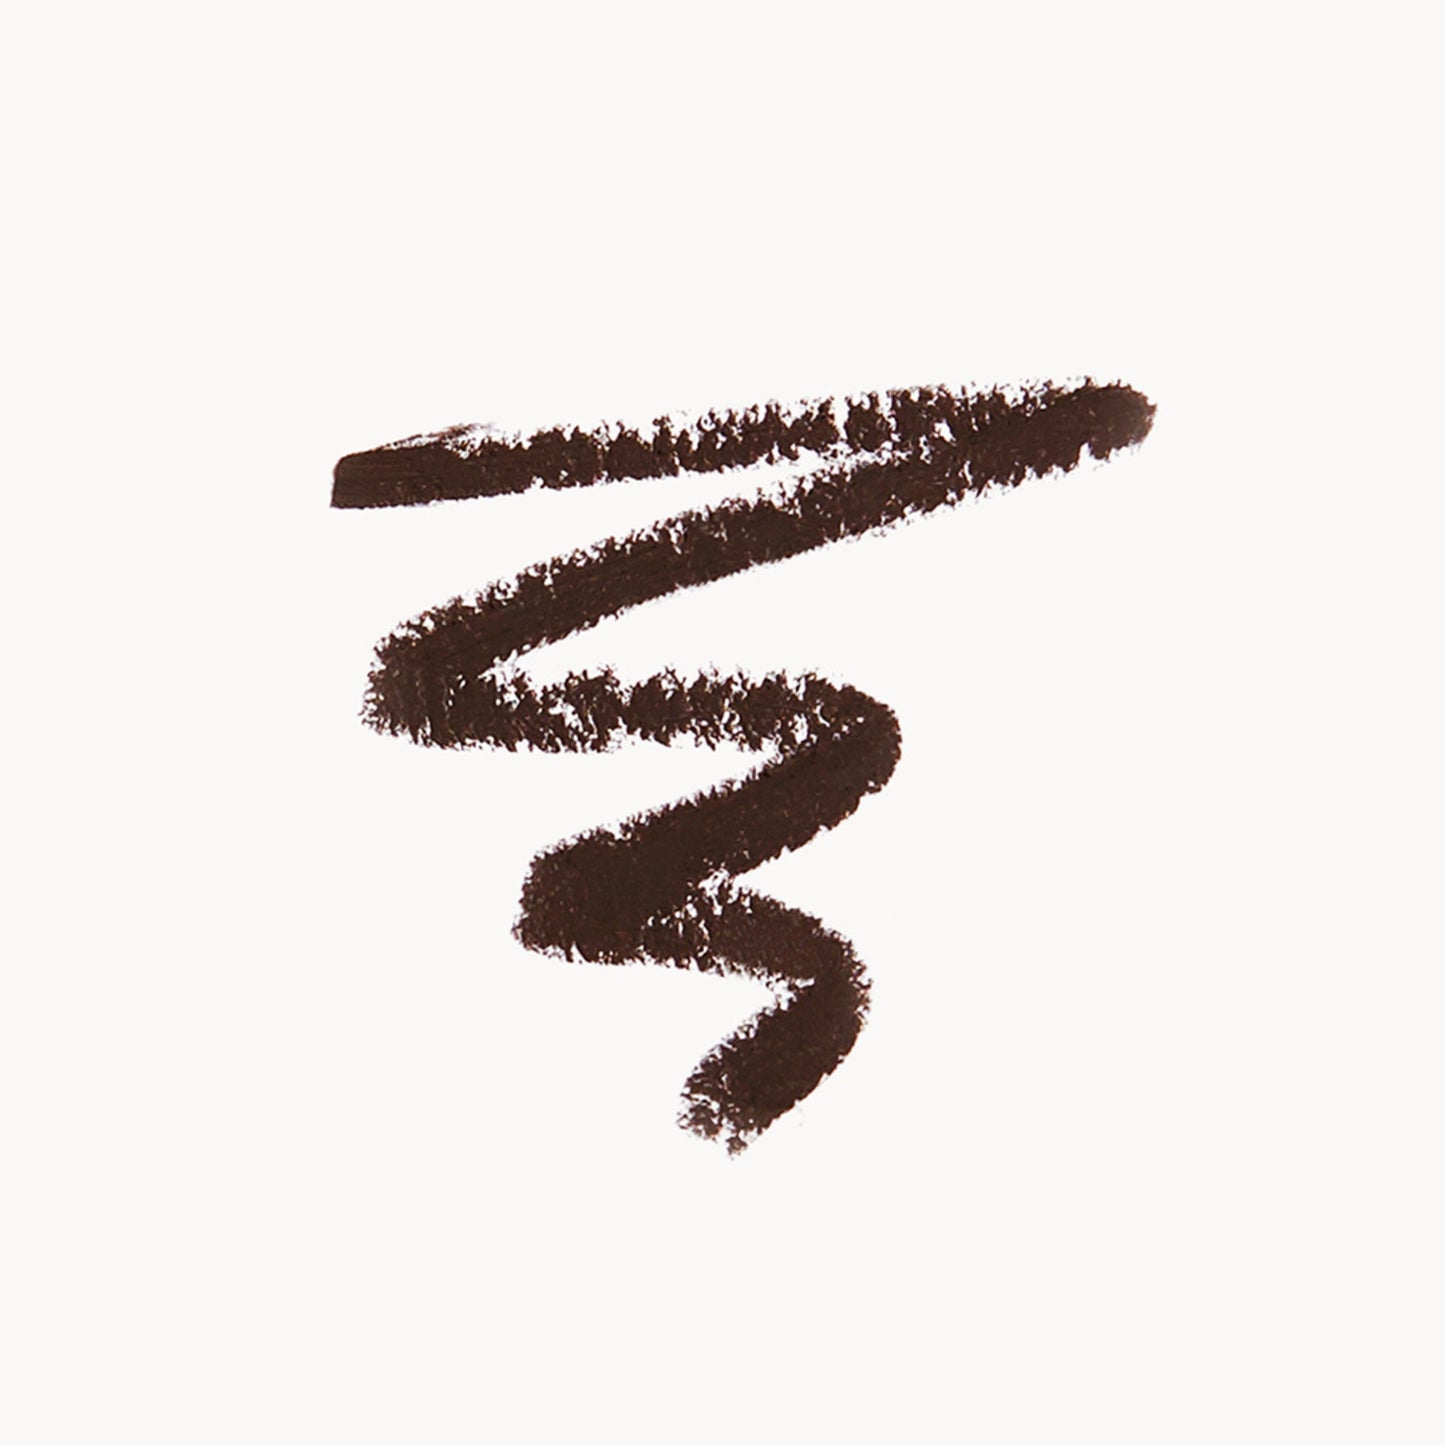 A thick earthy brown scribble on a white background